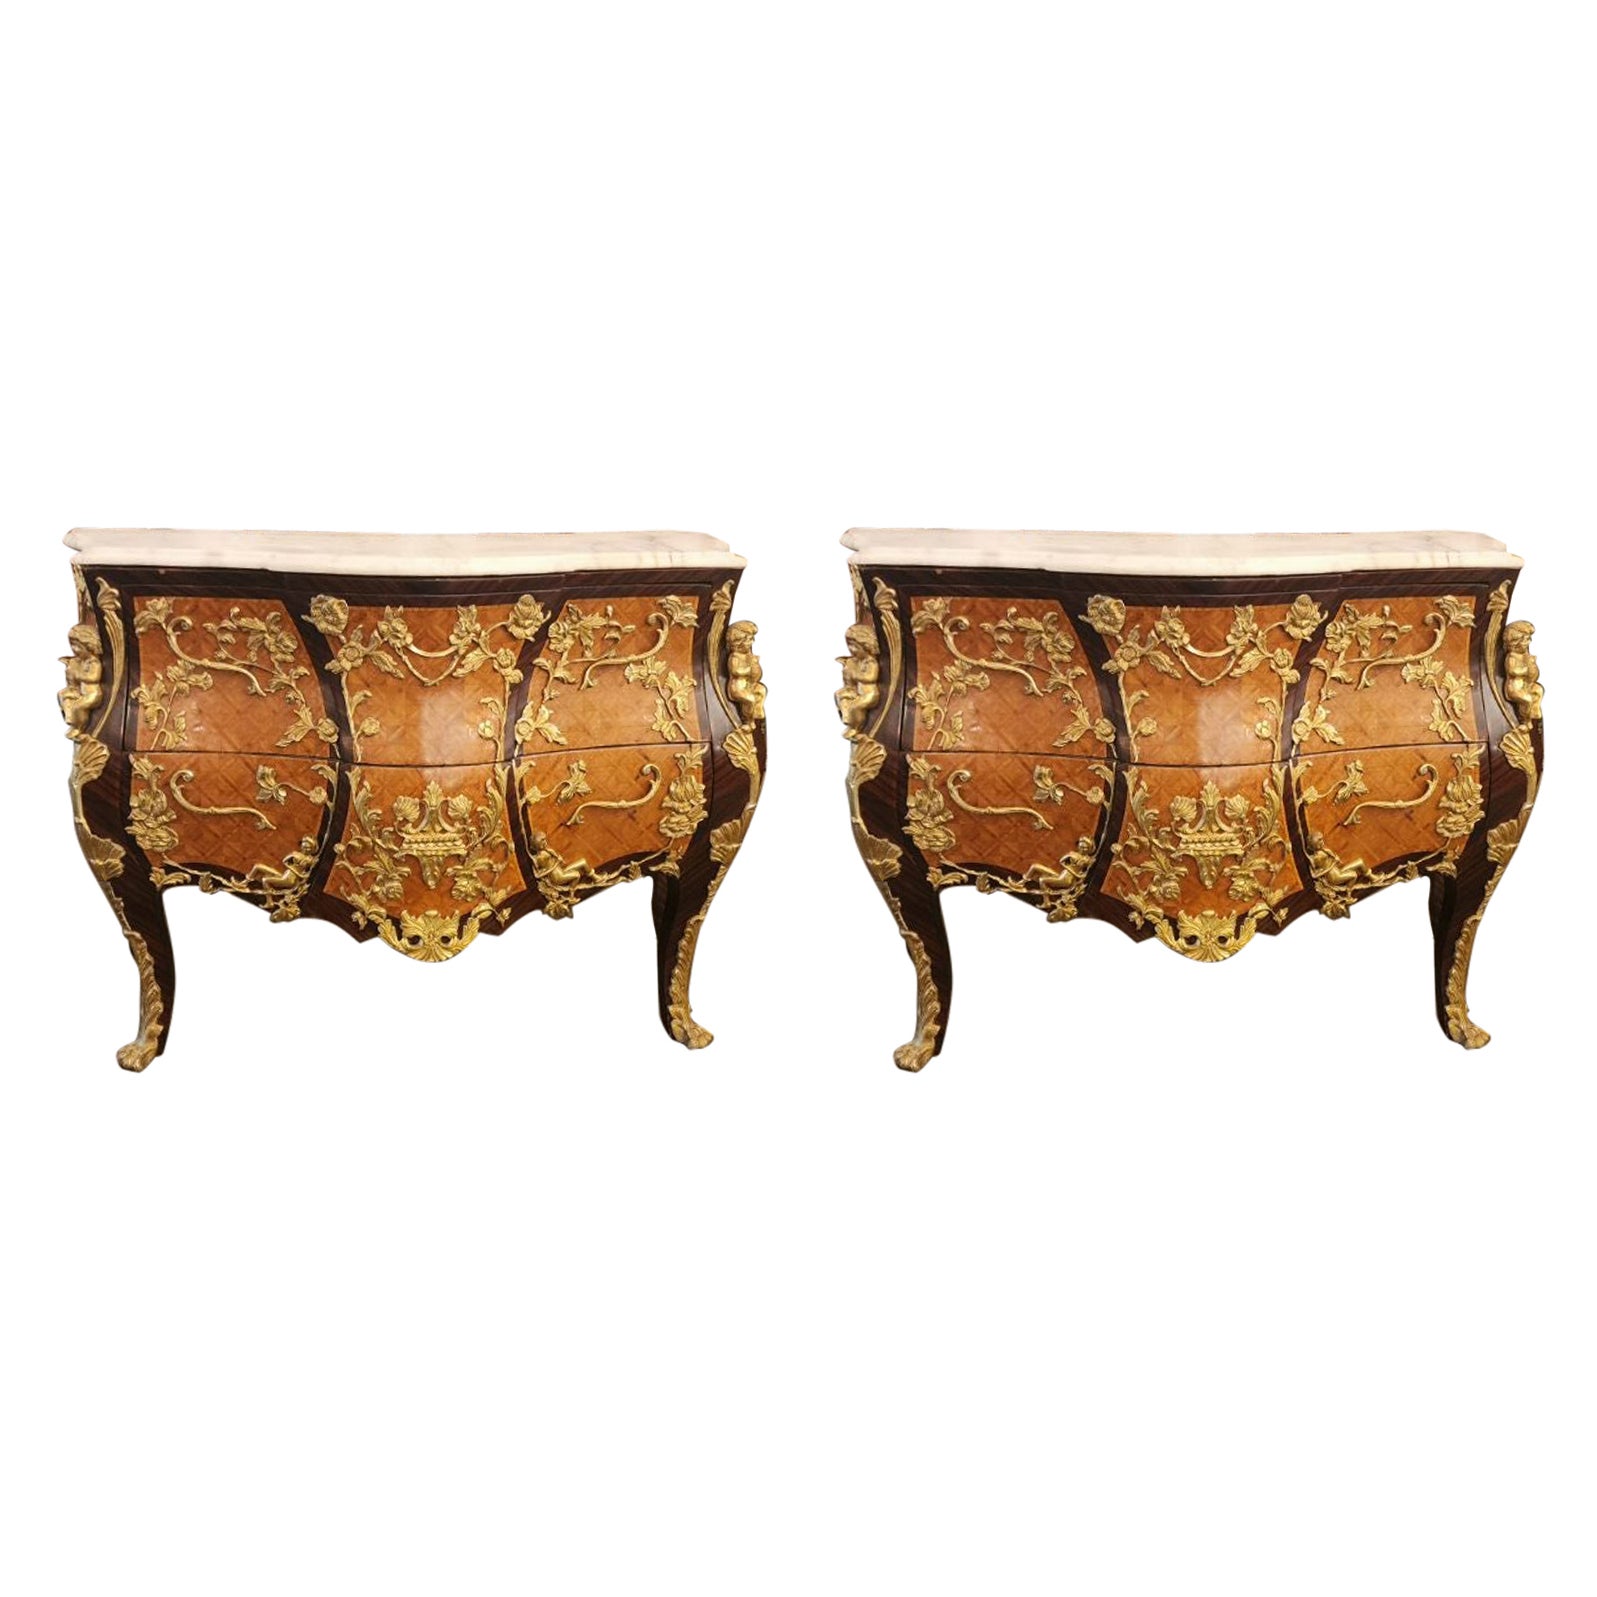 Pair of Louis XV Style Marble-Top Ormolu Commodes